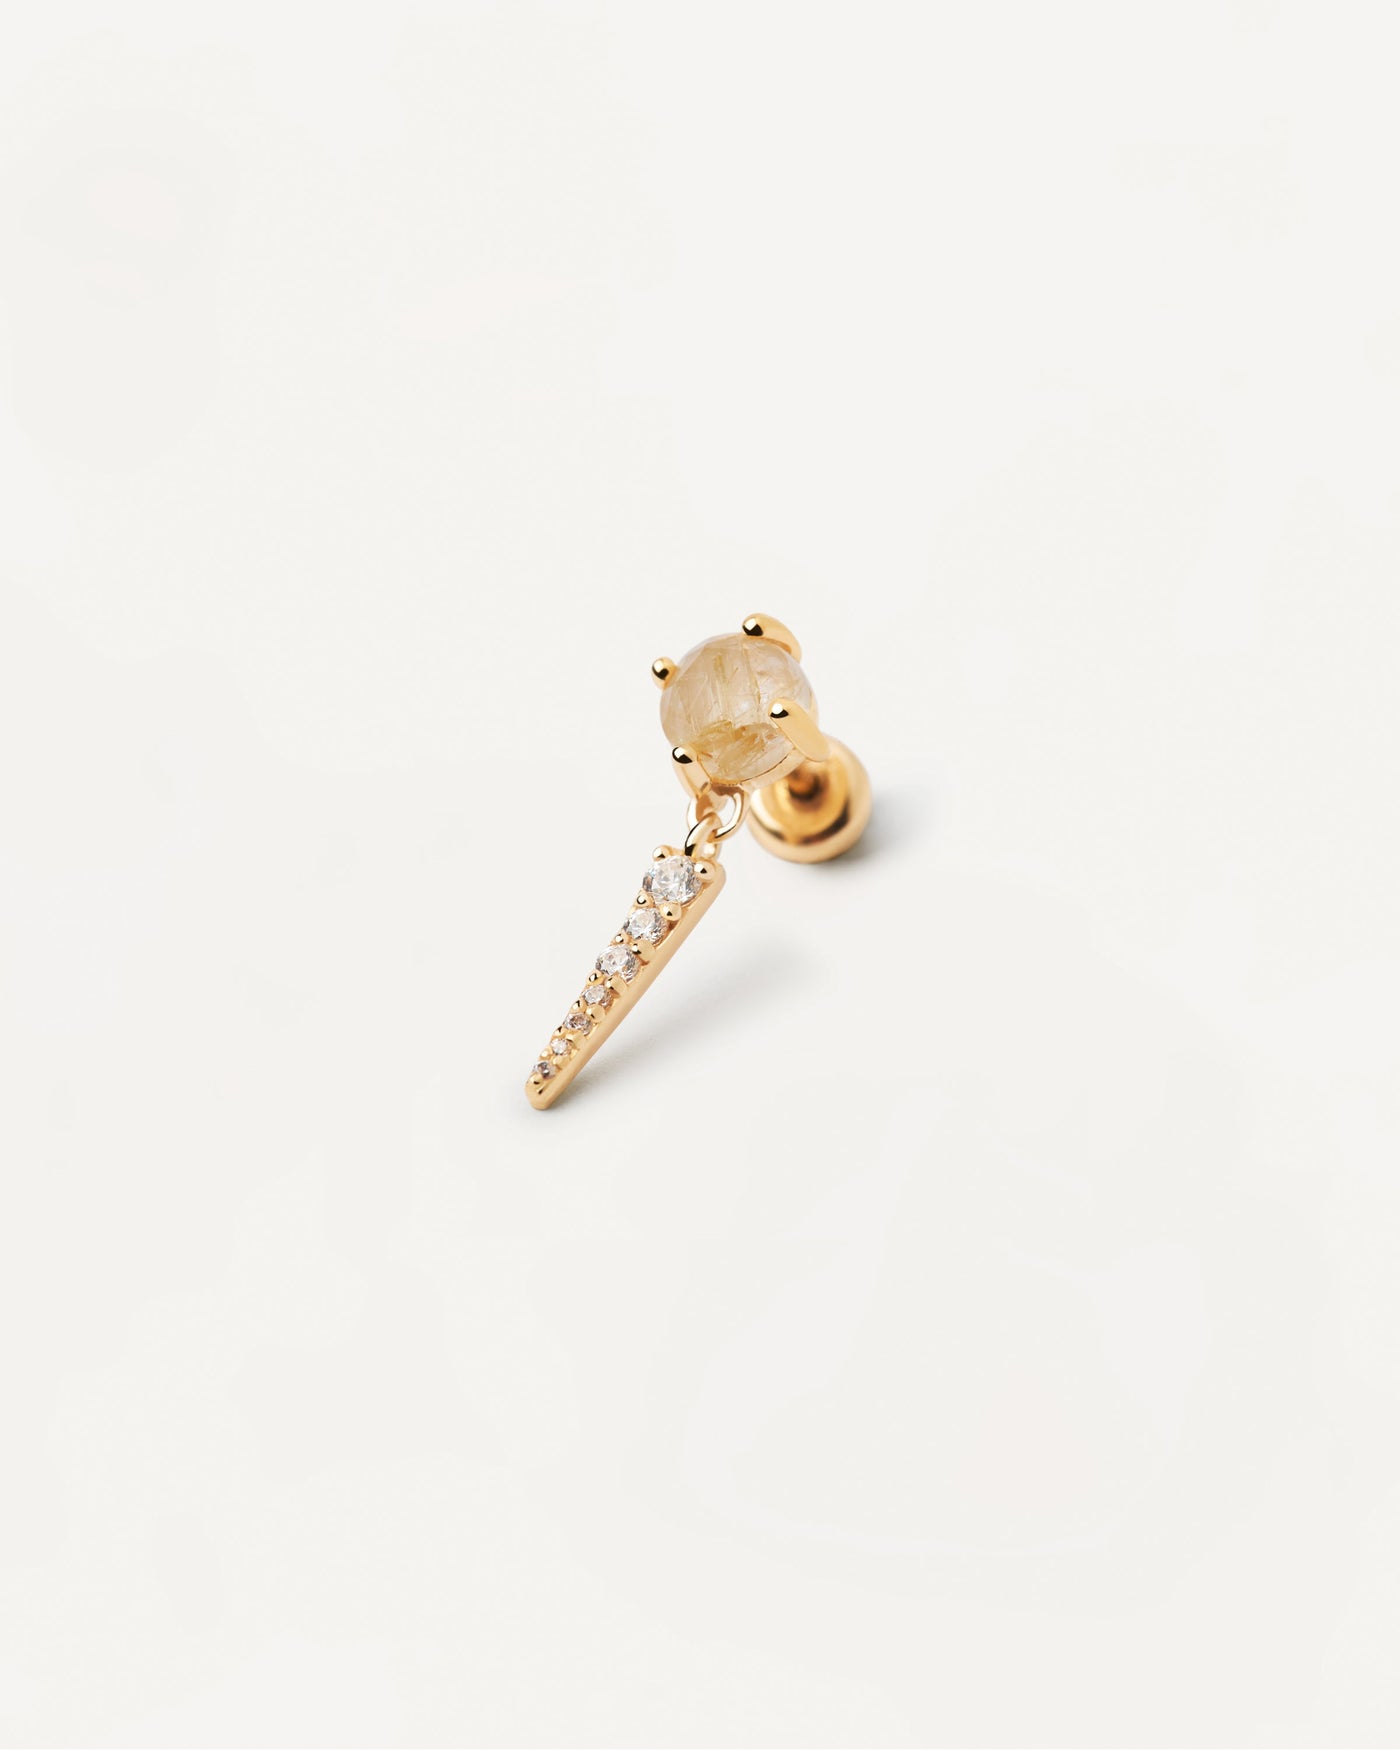 2023 Selection | Yoki Rutilated Quartz Single Earring. Gold-plated ear piercing with beige gemstone and white zirconia pendant. Get the latest arrival from PDPAOLA. Place your order safely and get this Best Seller. Free Shipping.